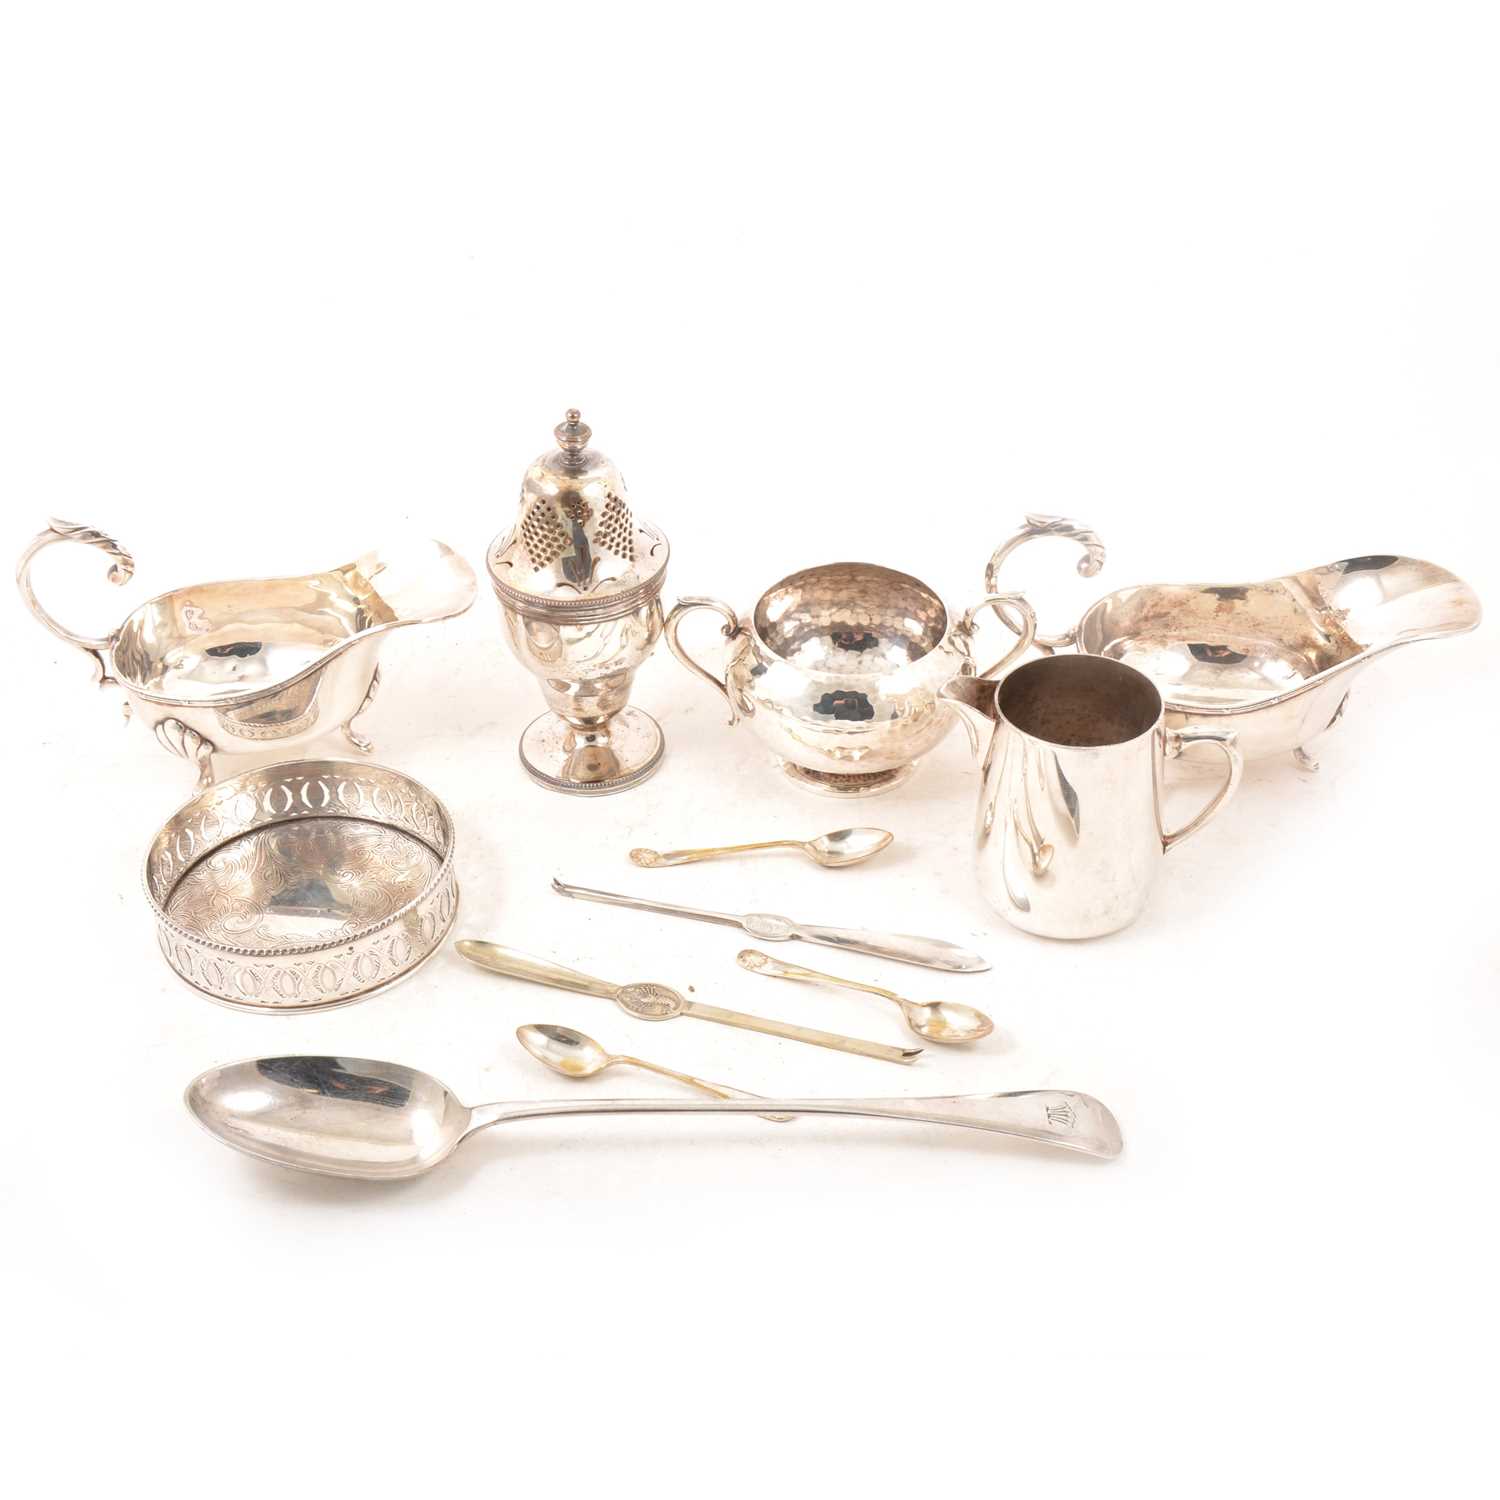 Lot 133 - Silver-plated bottle coaster, sugar bowl, pair of sauce boats, lobster picks, basting spoon.